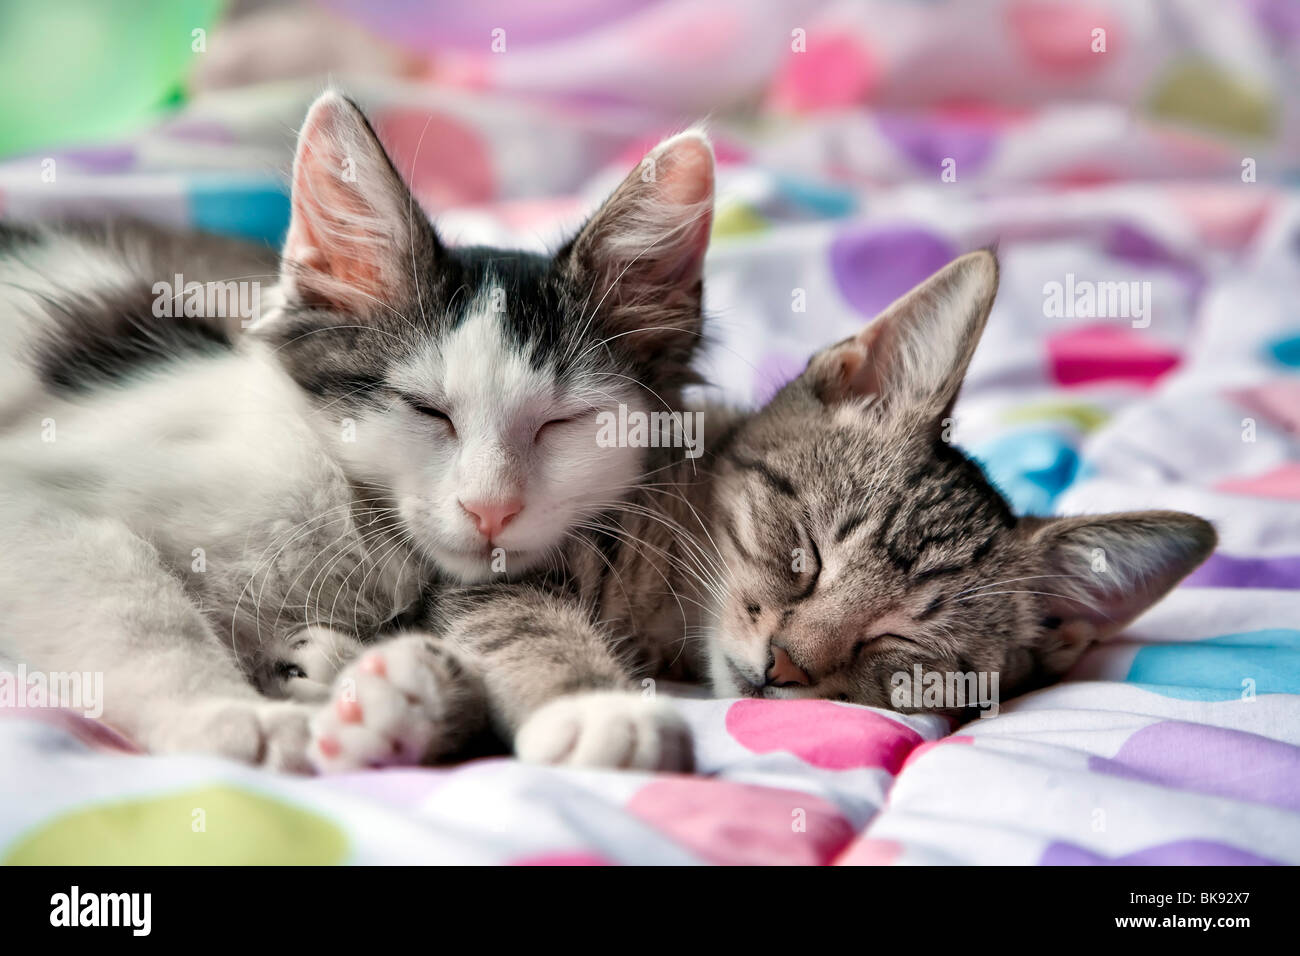 Close-up of two kittens resting on the bed Stock Photo